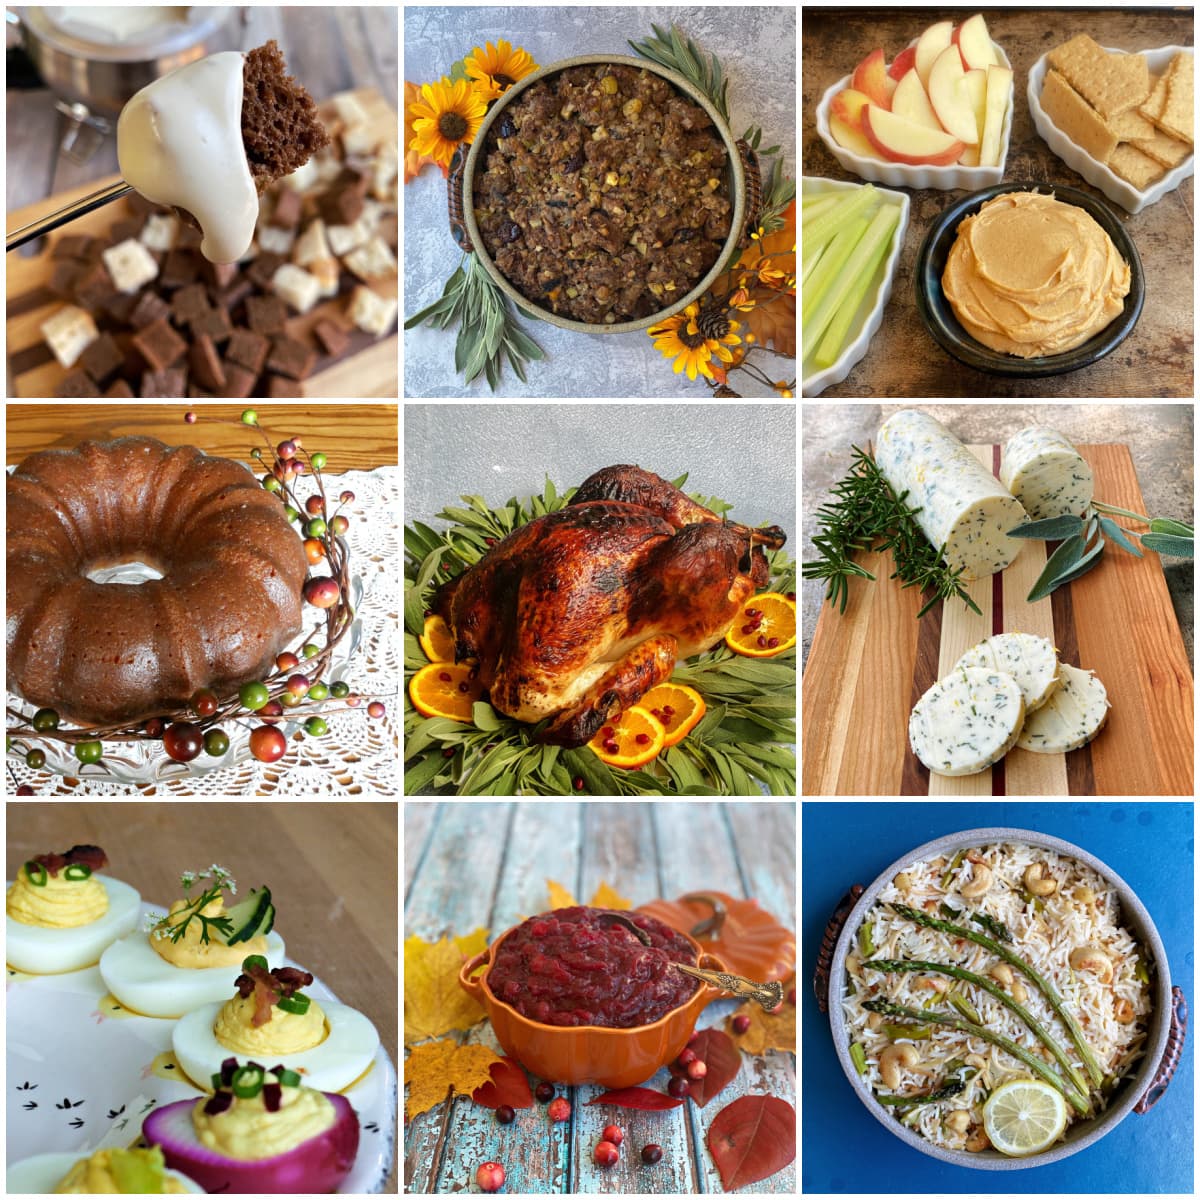 9-panel collage showing images of food and recipes from November Food Holidays calendar.